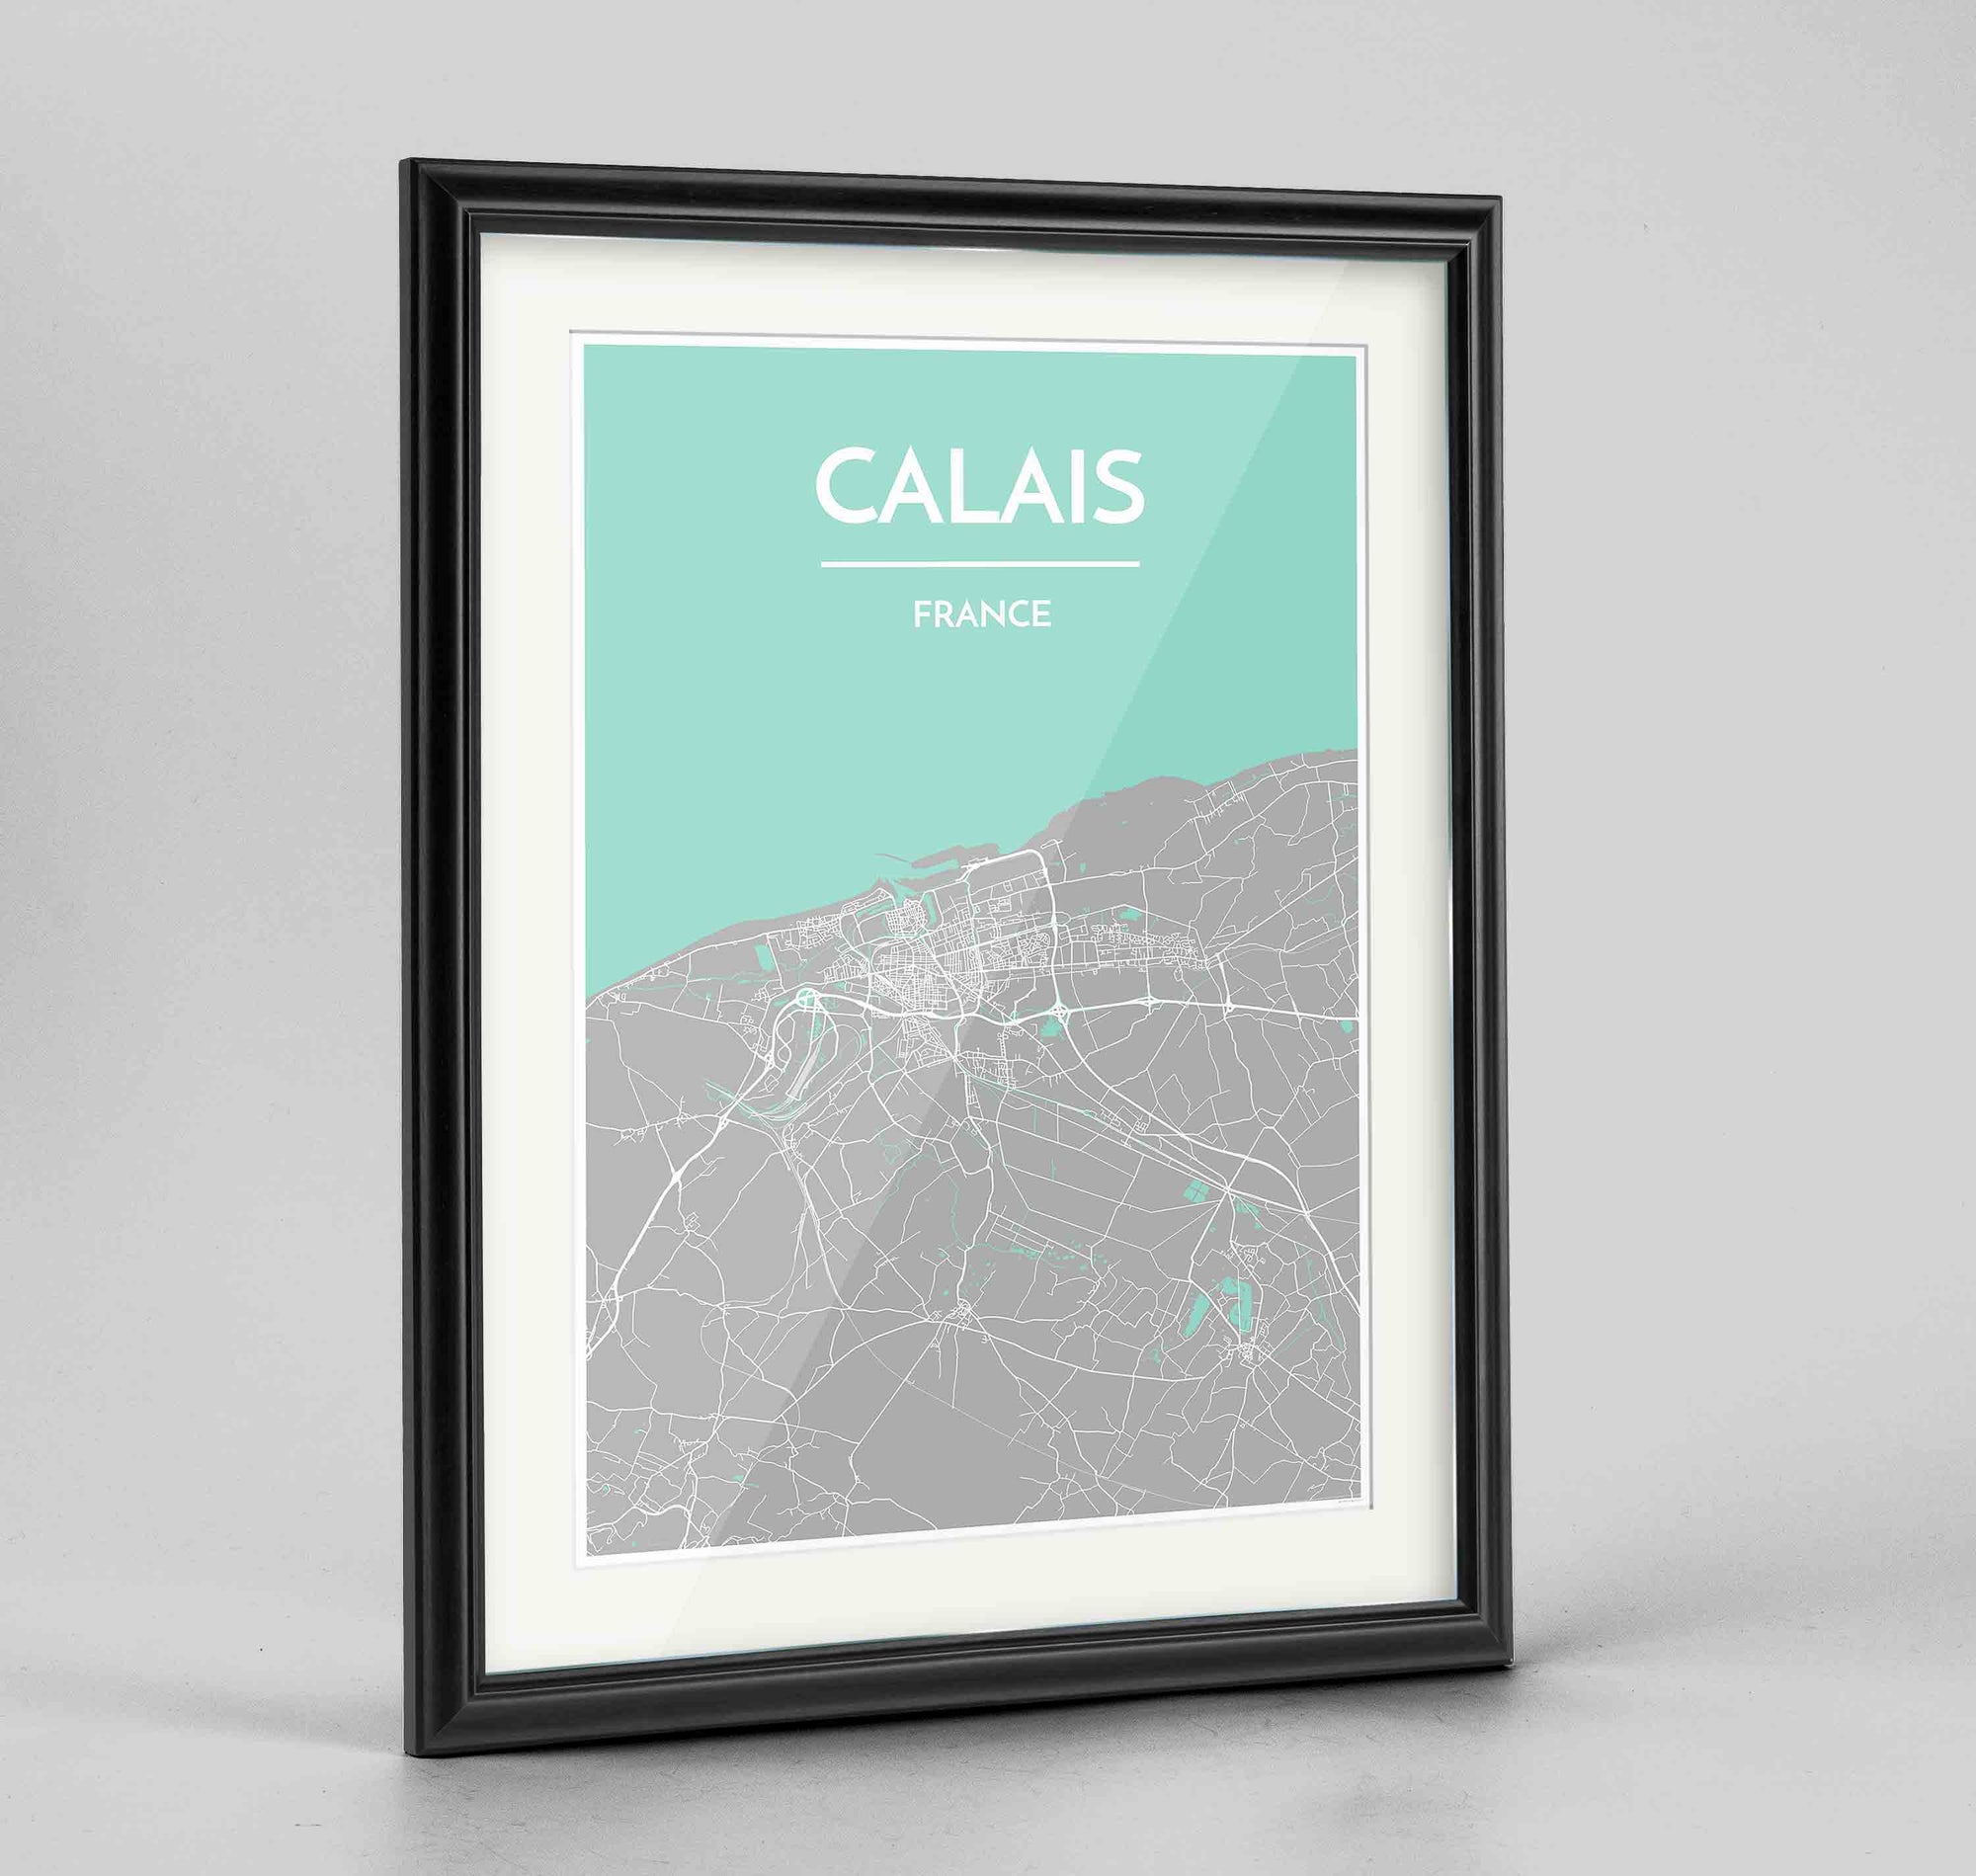 Framed Calais Map Art Print 24x36" Traditional Black frame Point Two Design Group